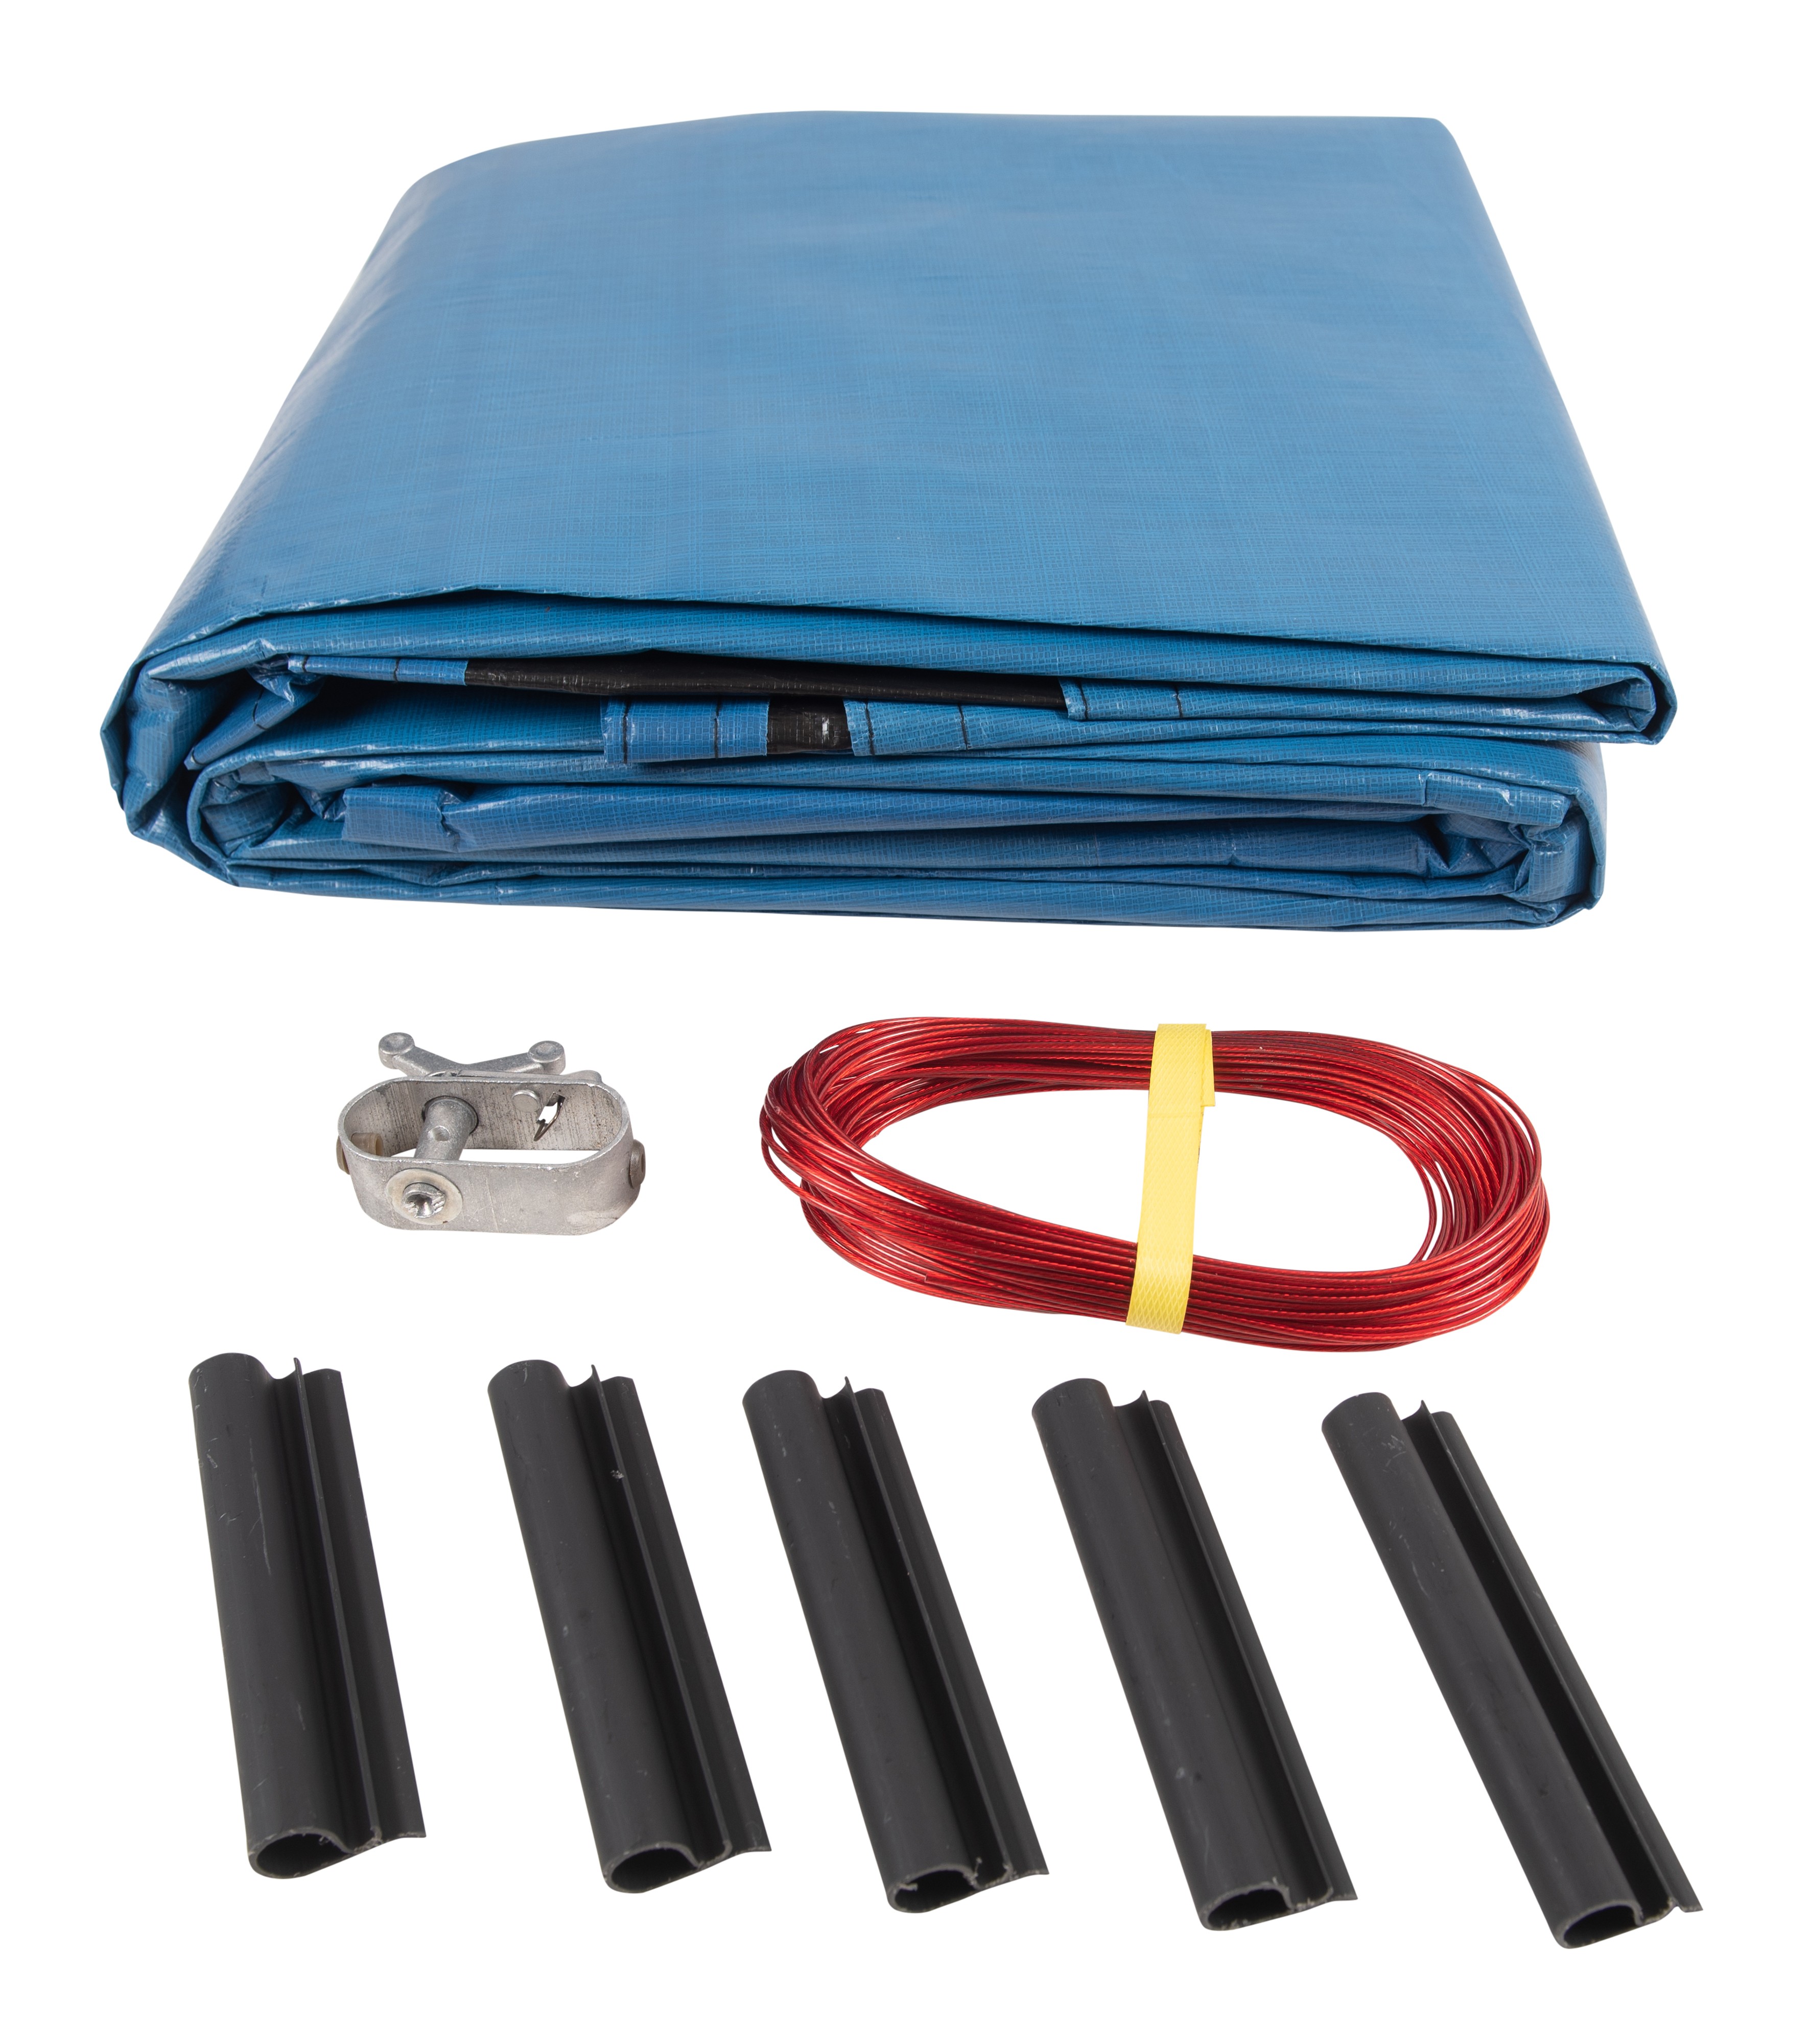 SET SunSolar Energy Technologies-  Super Duty series Above Ground Solid Pool Cover for 21x41 Foot Oval Swimming Pool - Winter Pool Cover with Sturdy Cable and Winch 15-Yr warranty. Cover Clips Included.